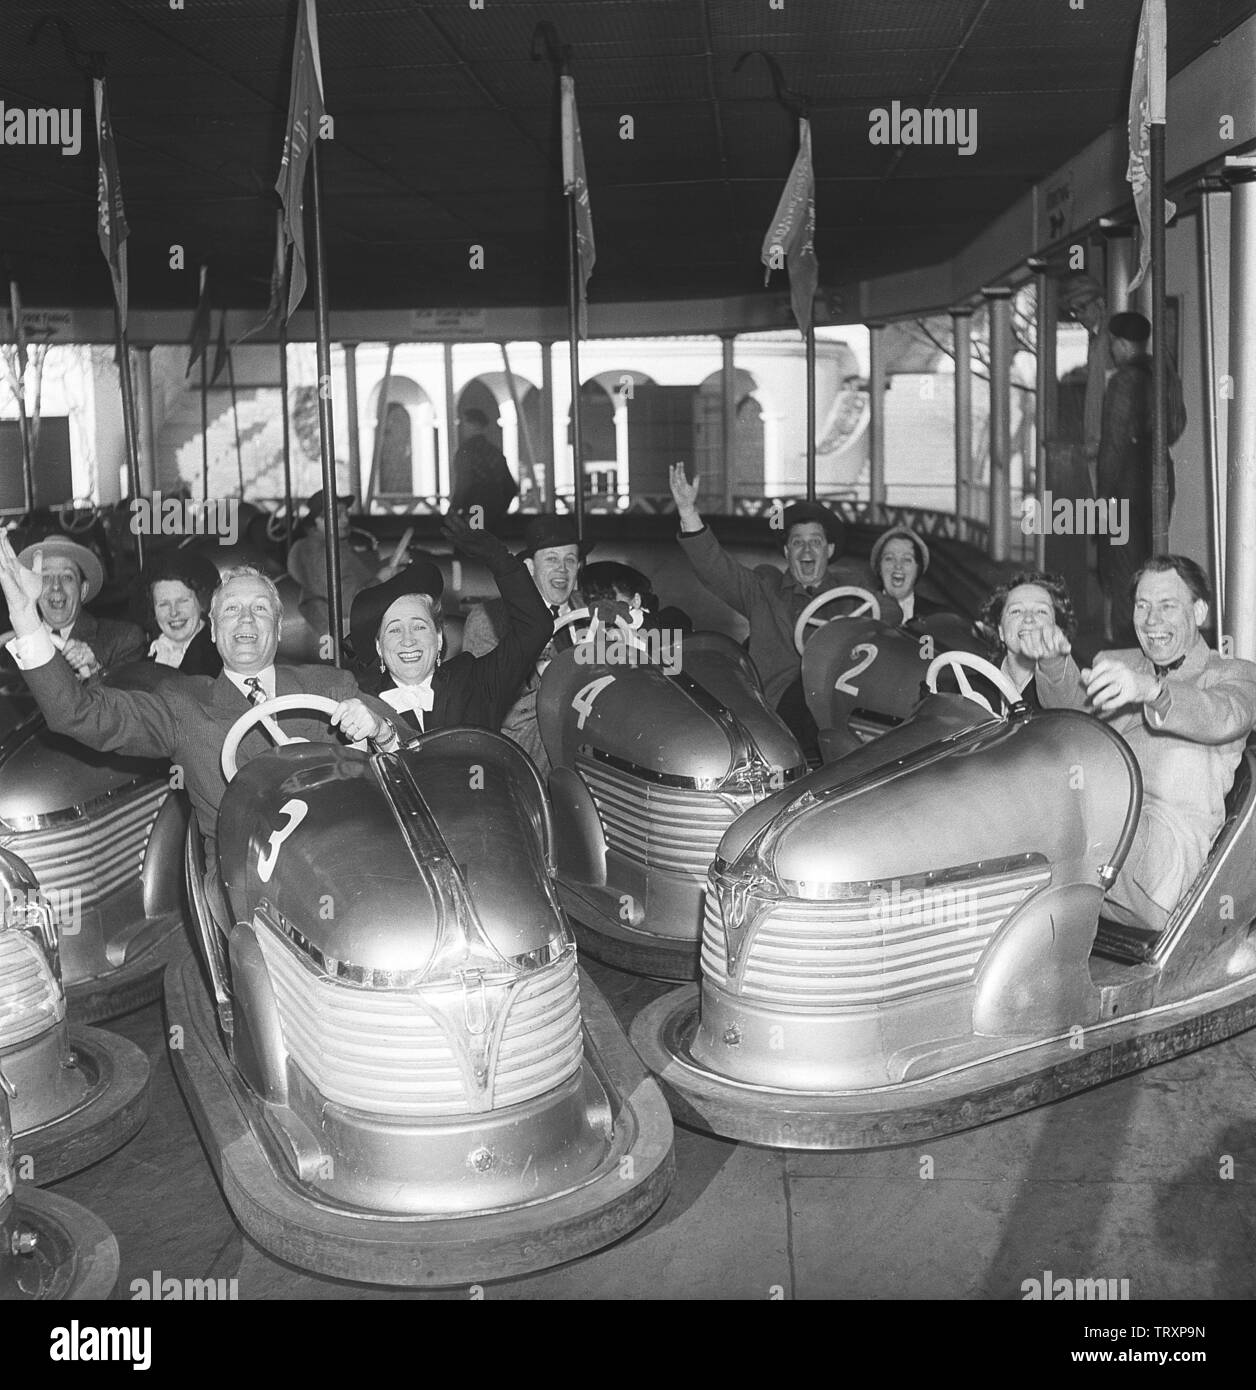 Amusement park in the 1950s. No matter old or young, bumper cars are one of the favorite attractions. Pictured a group of elderly people driving and having fun. Sweden 1950. Kristoffersson ref AY57-4 Stock Photo